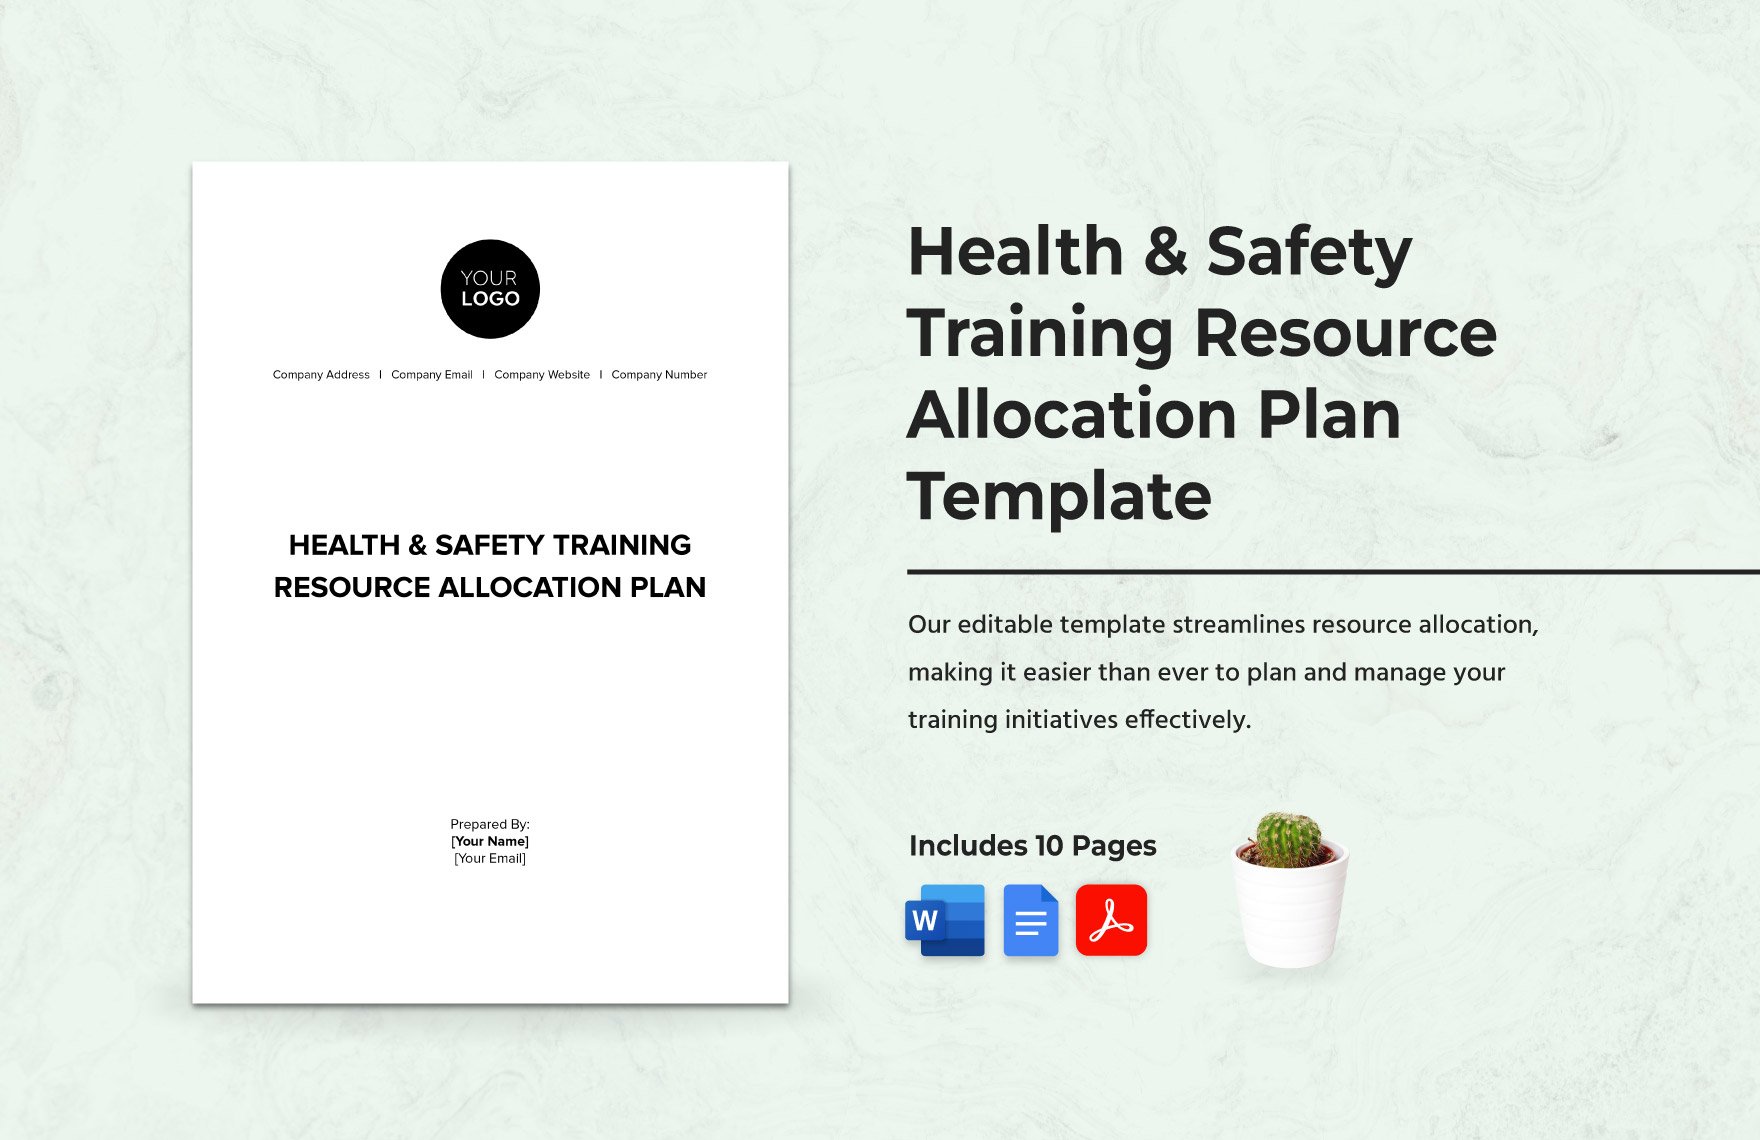 Health & Safety Training Resource Allocation Plan Template in Word, Google Docs, PDF